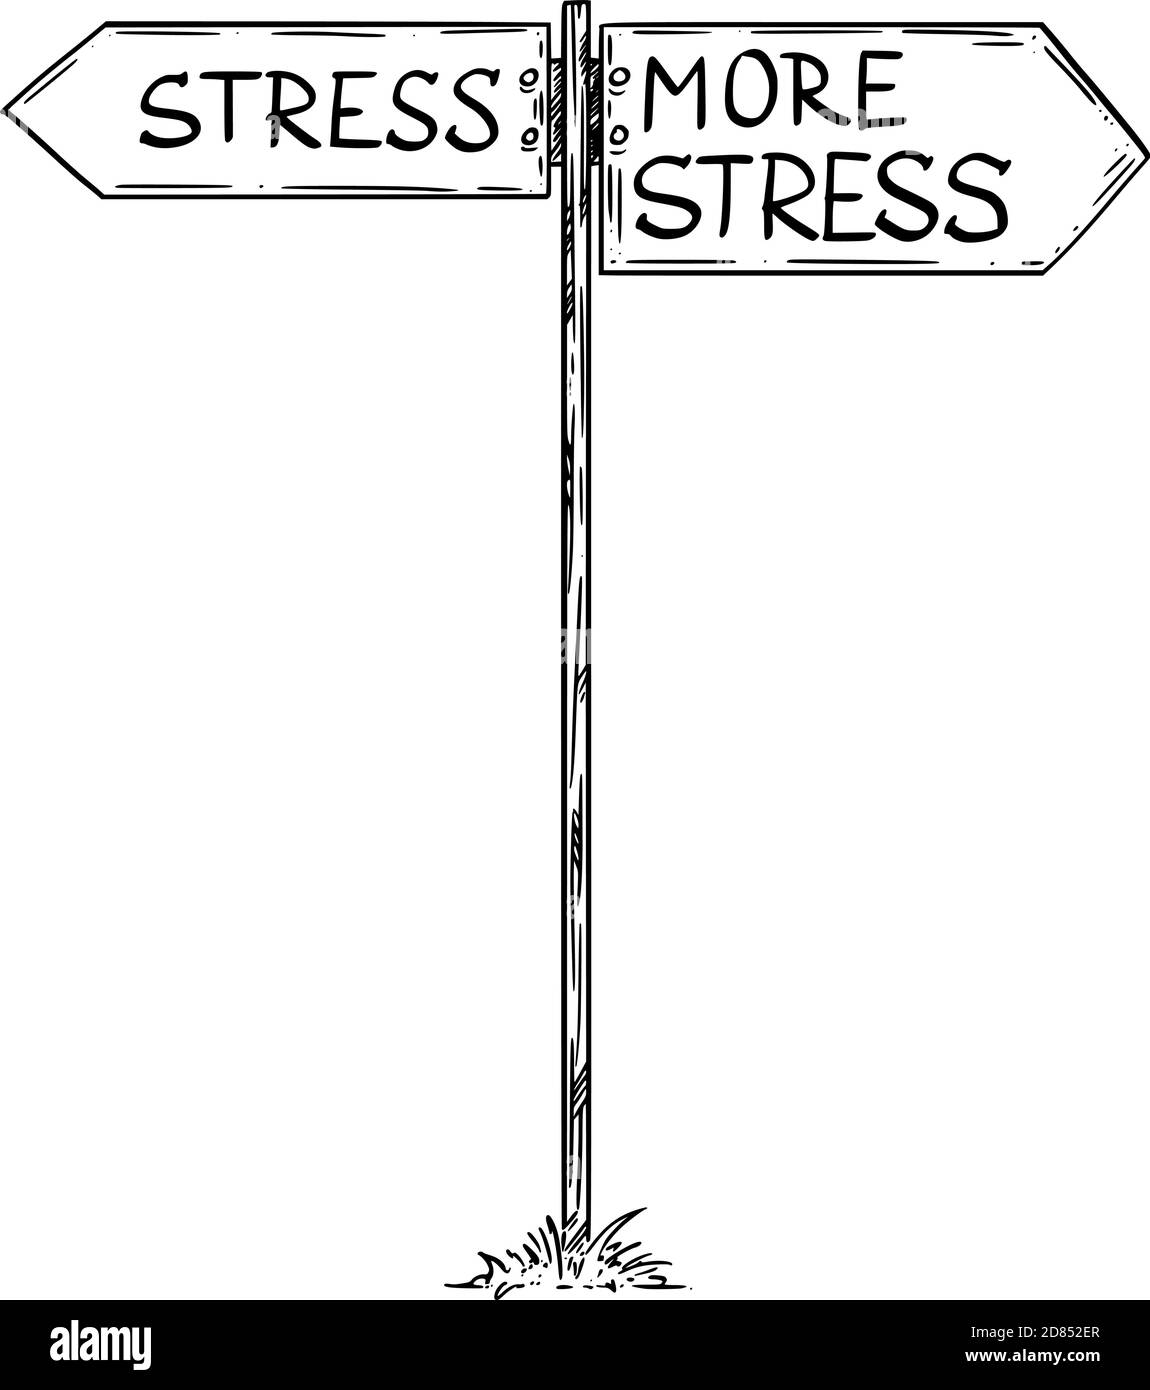 Vector cartoon illustration of stress or more stress to choose from. Traffic road sign with left and right pointing directional arrow signs. Stock Vector